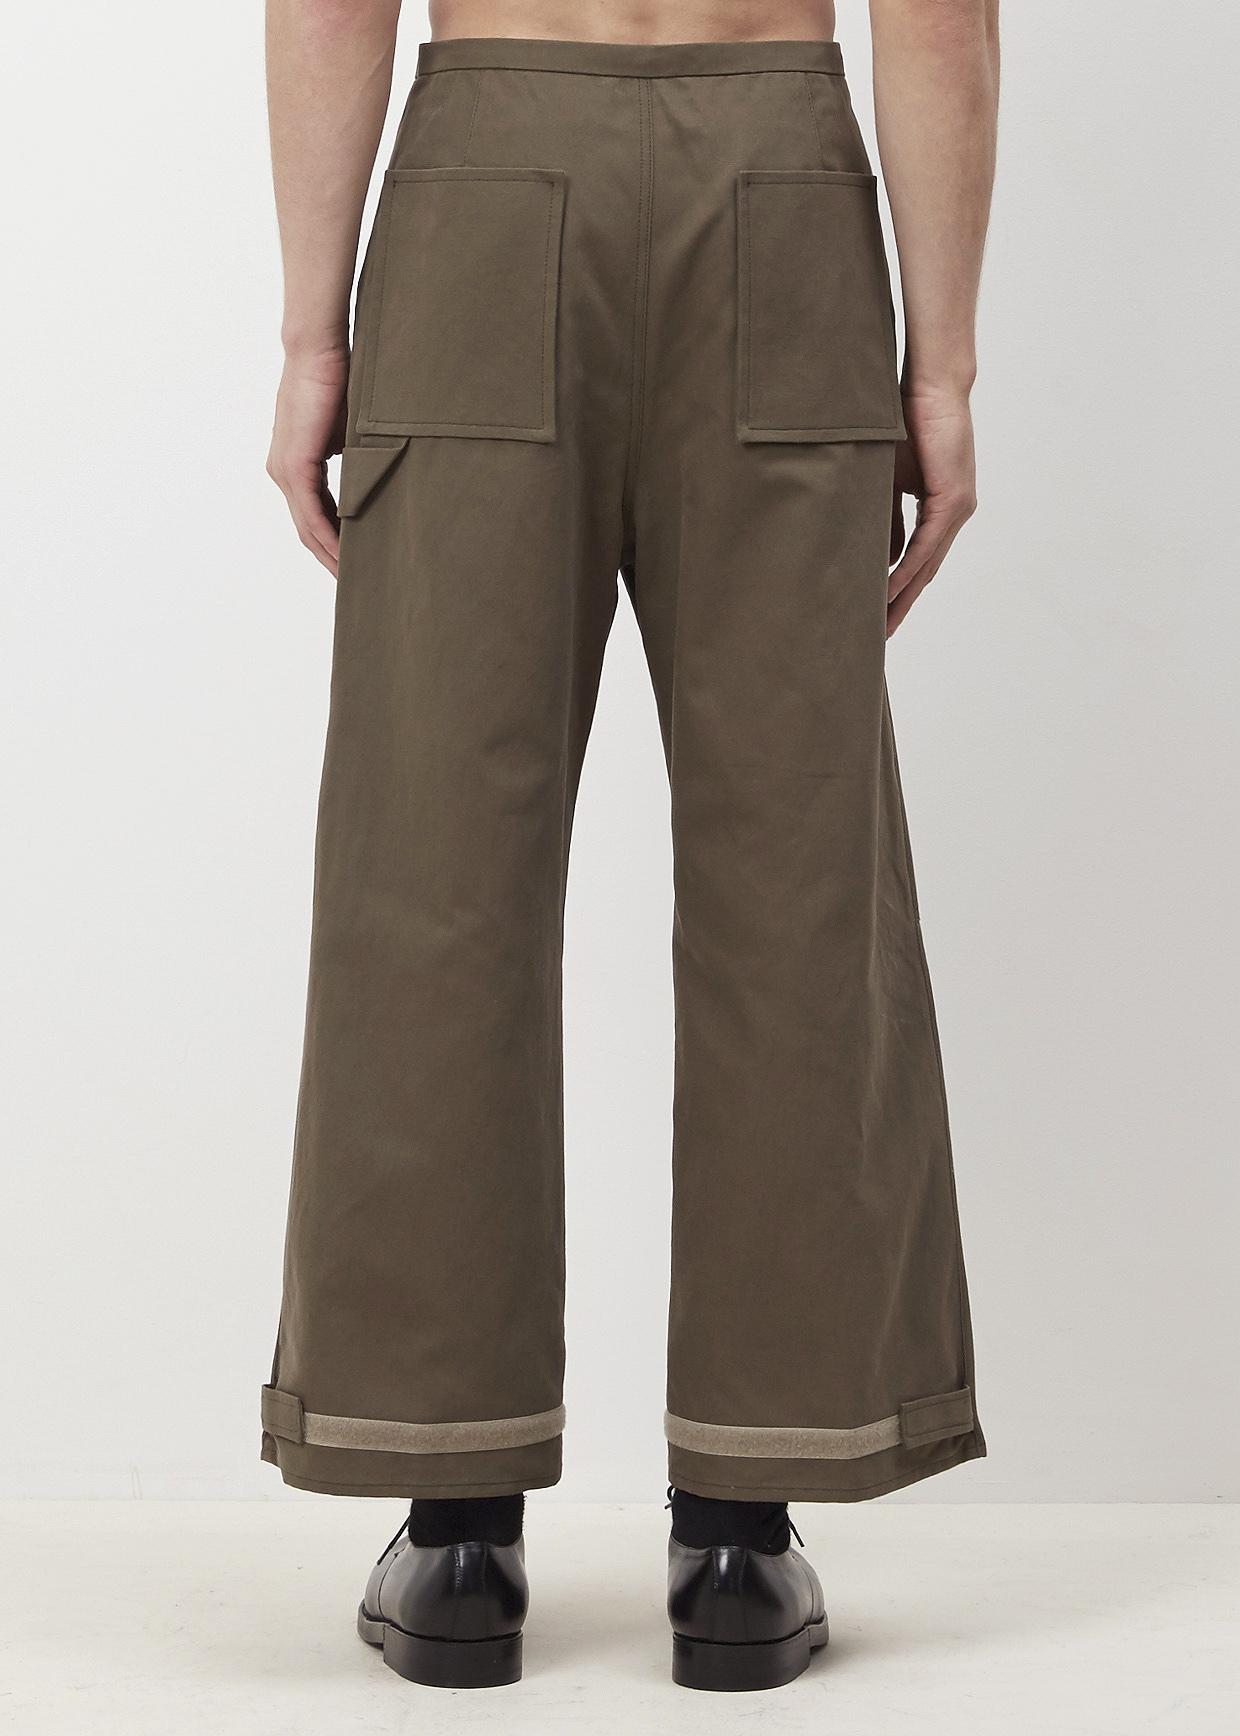 Lyst - Acne Studios Olive Green Phase Work Pants in Green for Men